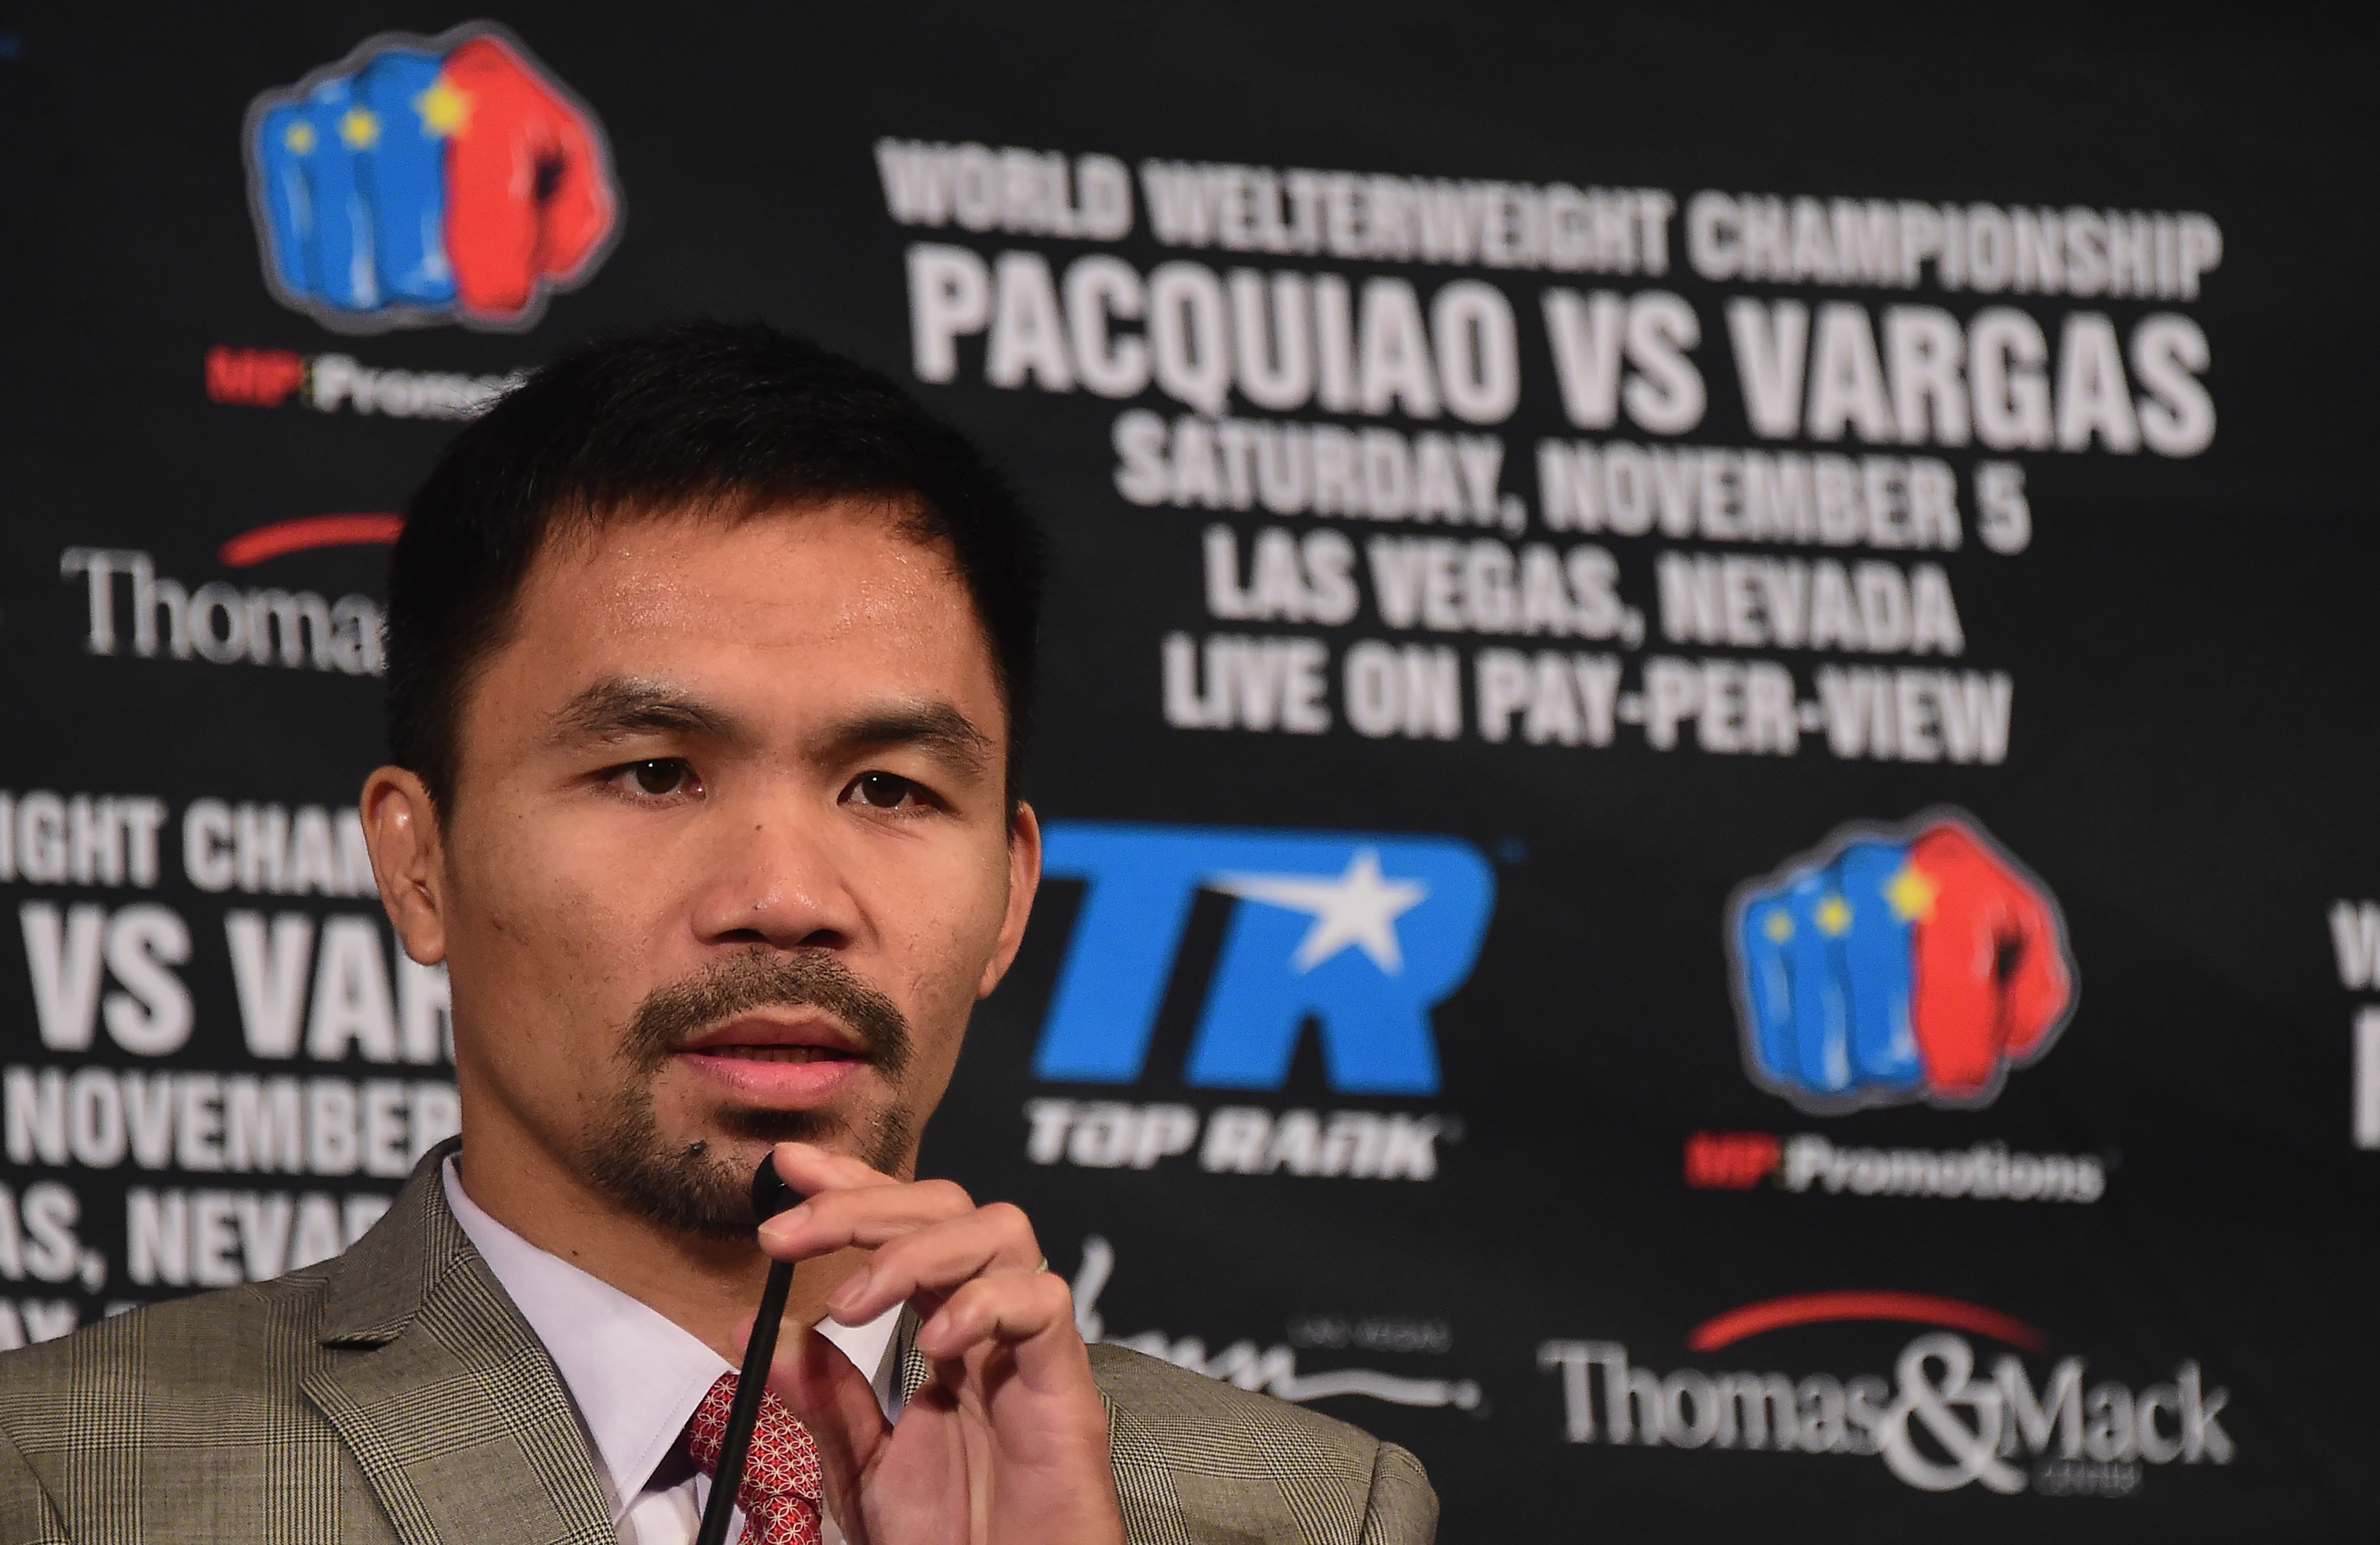 Boxer Manny Pacquiao speaks at a press conference with Jessie Vargas in Beverly Hills, California on September 8, 2016, announcing their November 5th fight. / AFP PHOTO / Frederic J. BROWN